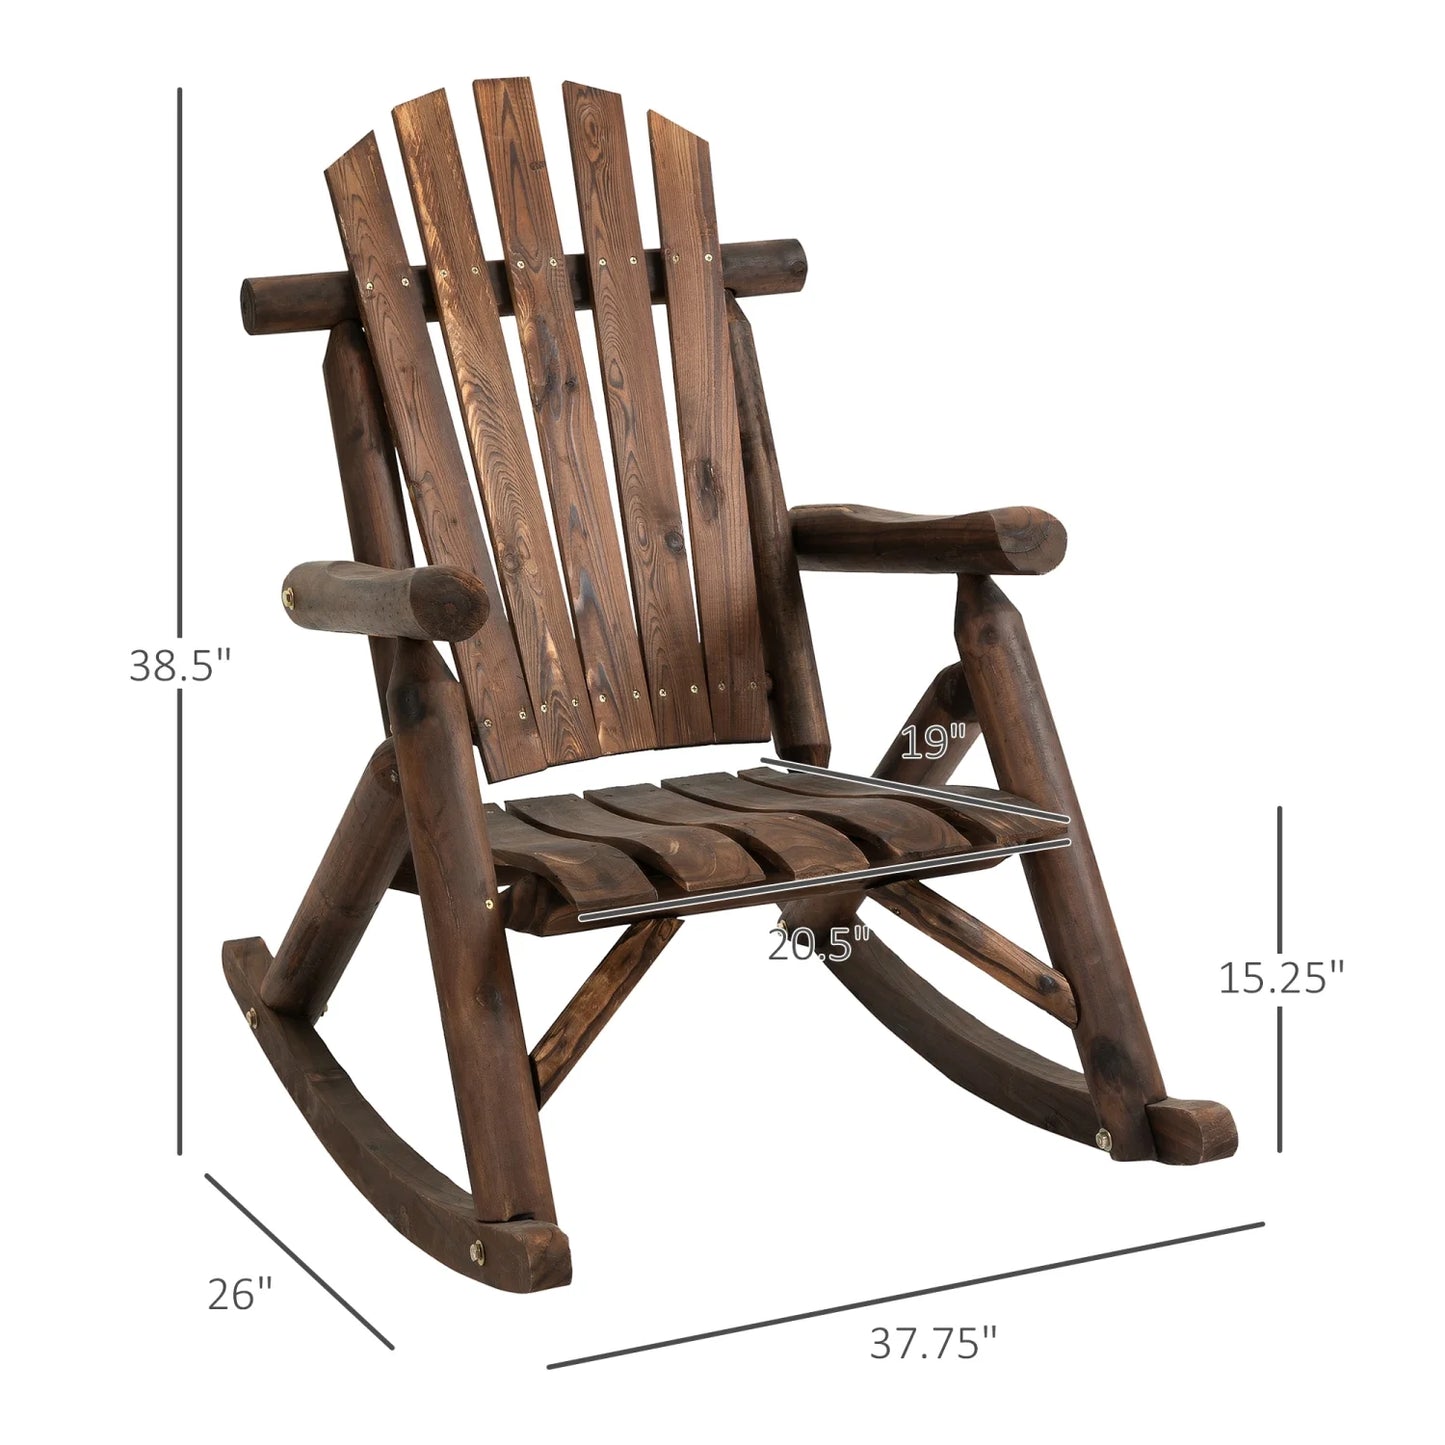 ZJbiubiuHome Outdoor Wooden Rocking Chair  Single-person Adirondack Rocking Patio Chair with Rustic High Back  Slatted Seat and Backrest for Indoor  Backyard  Garden  Carbonized